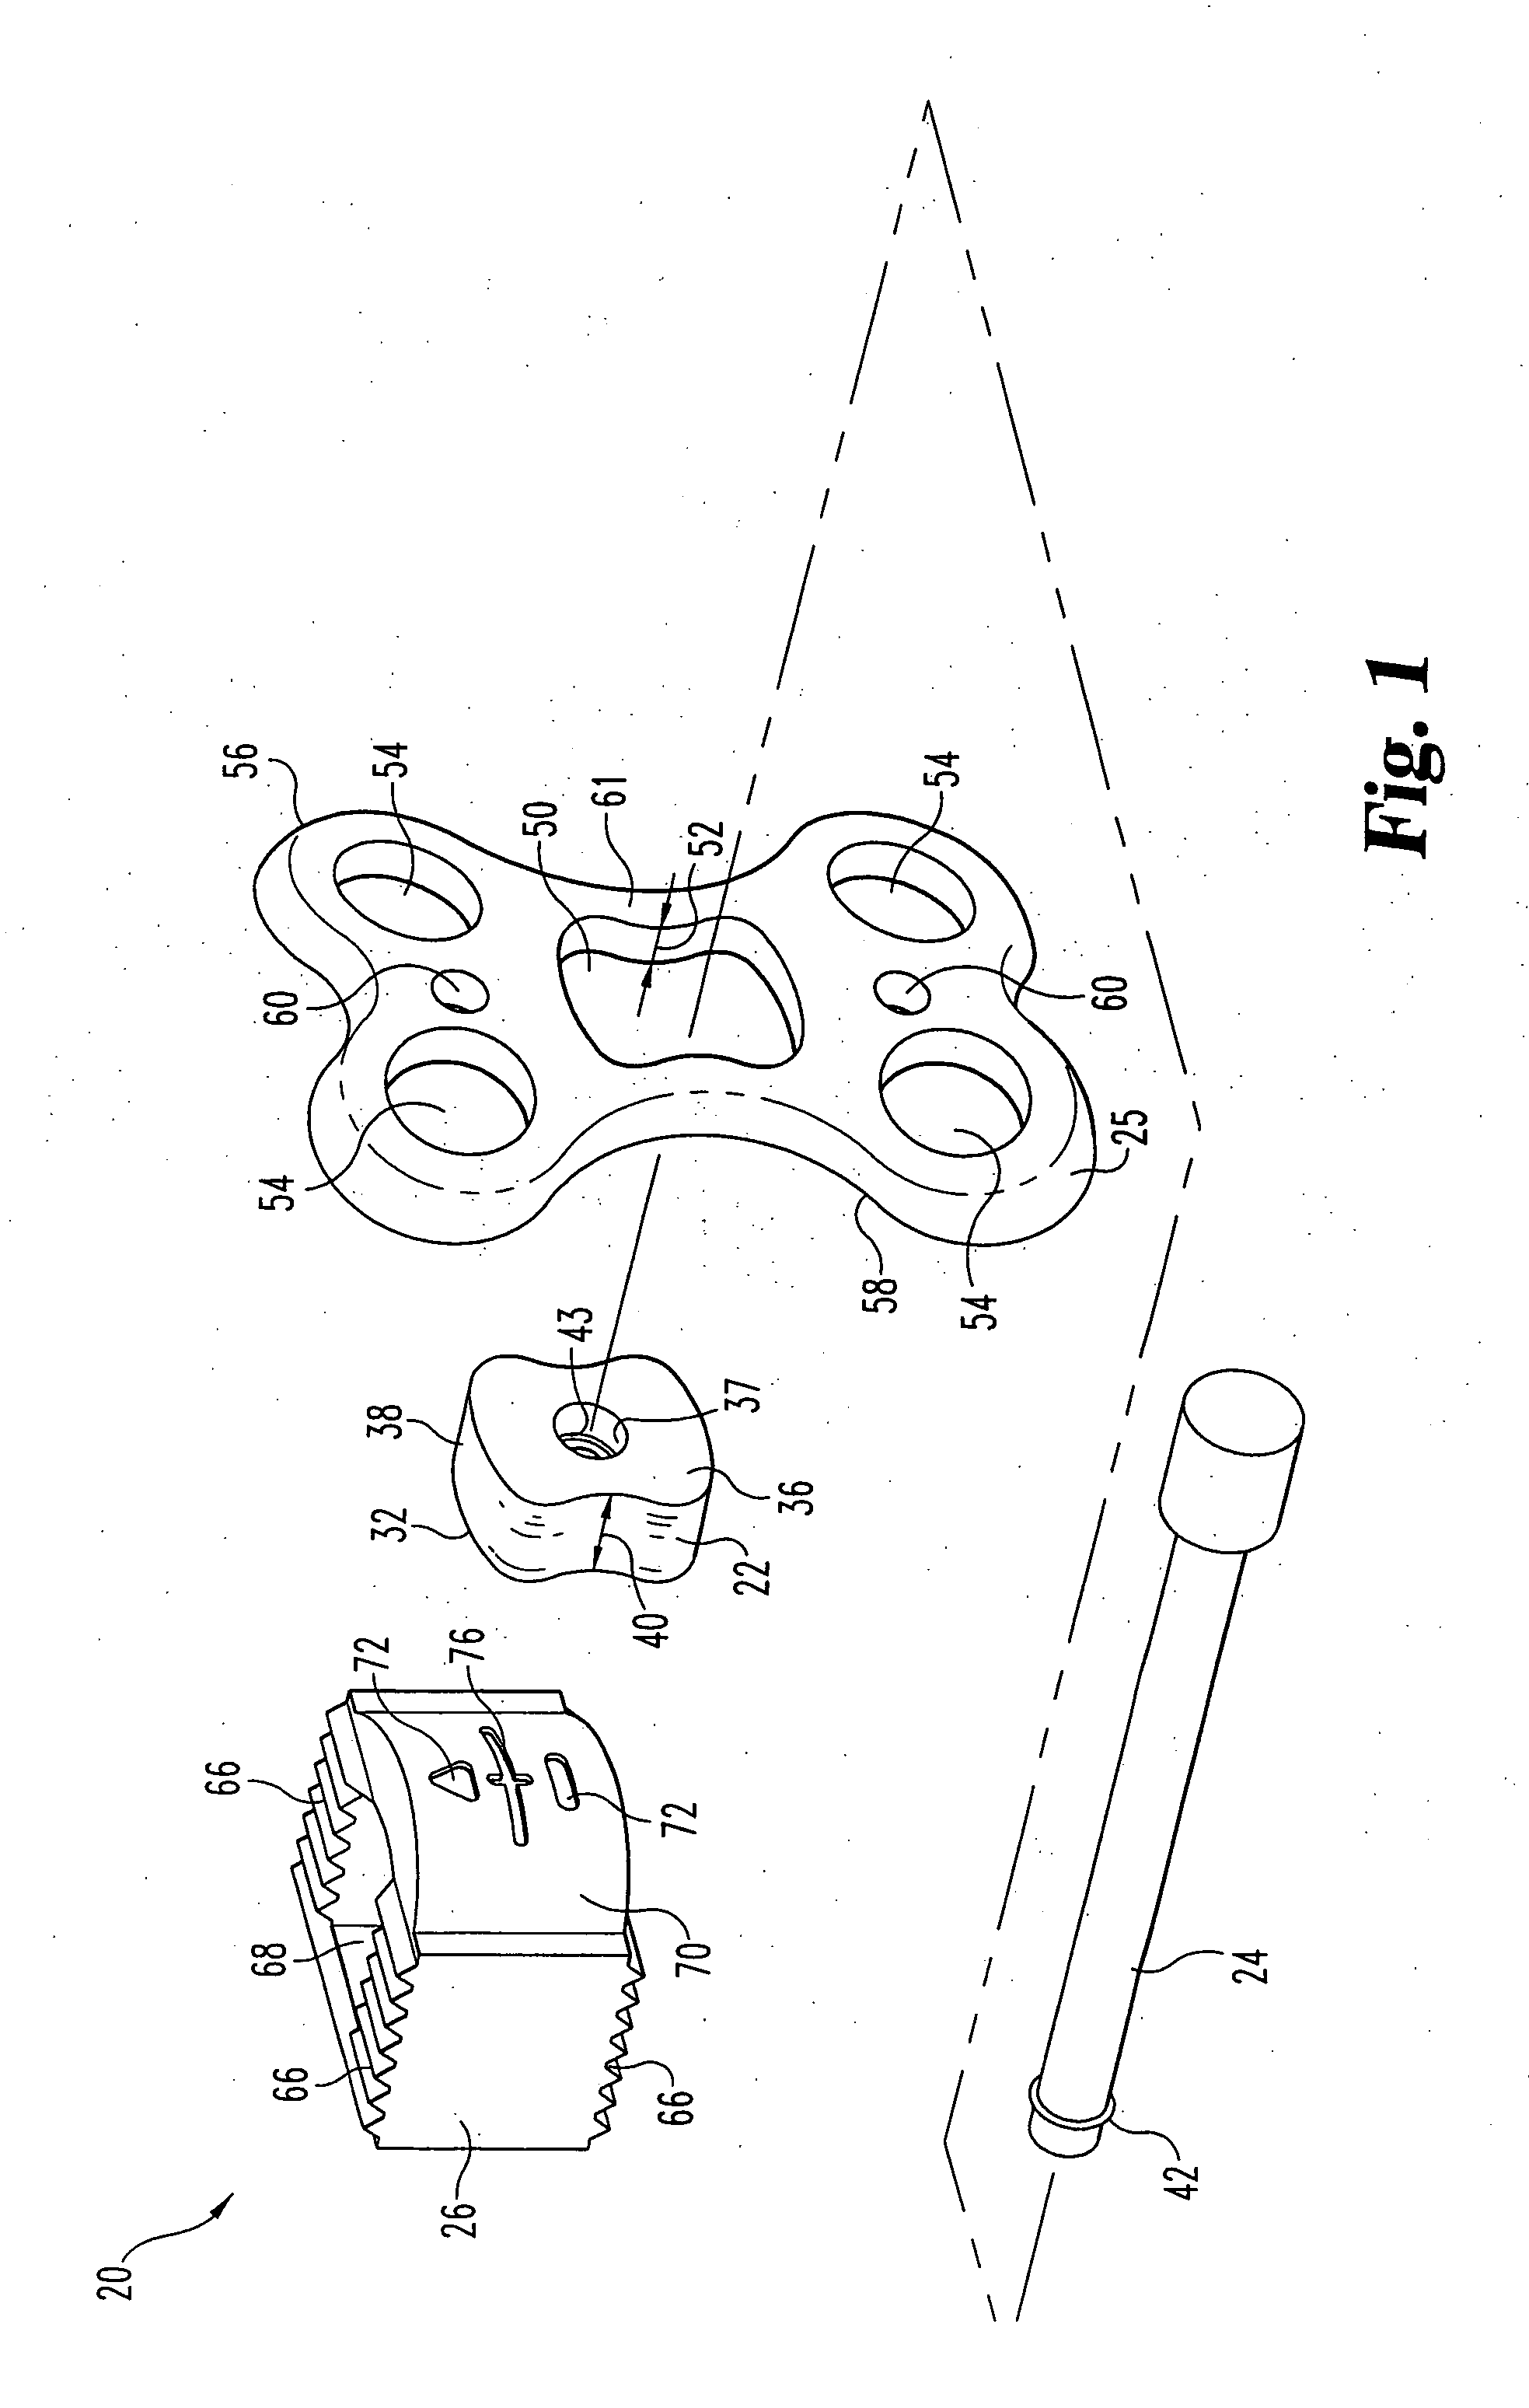 Orthopedic support locating or centering feature and method